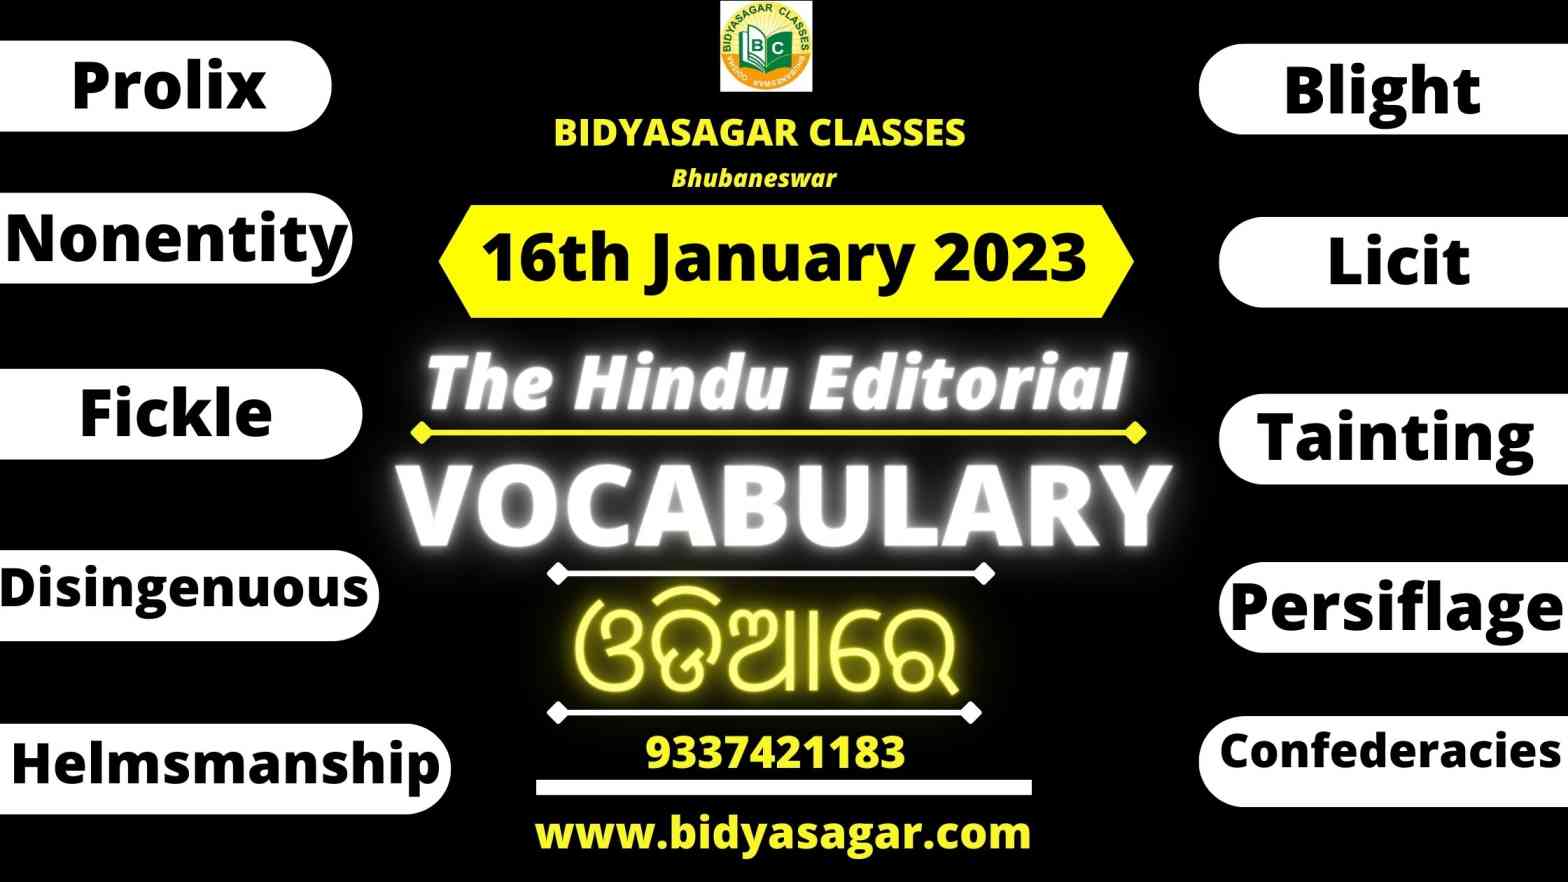 The Hindu Editorial Vocabulary of 16th January 2023